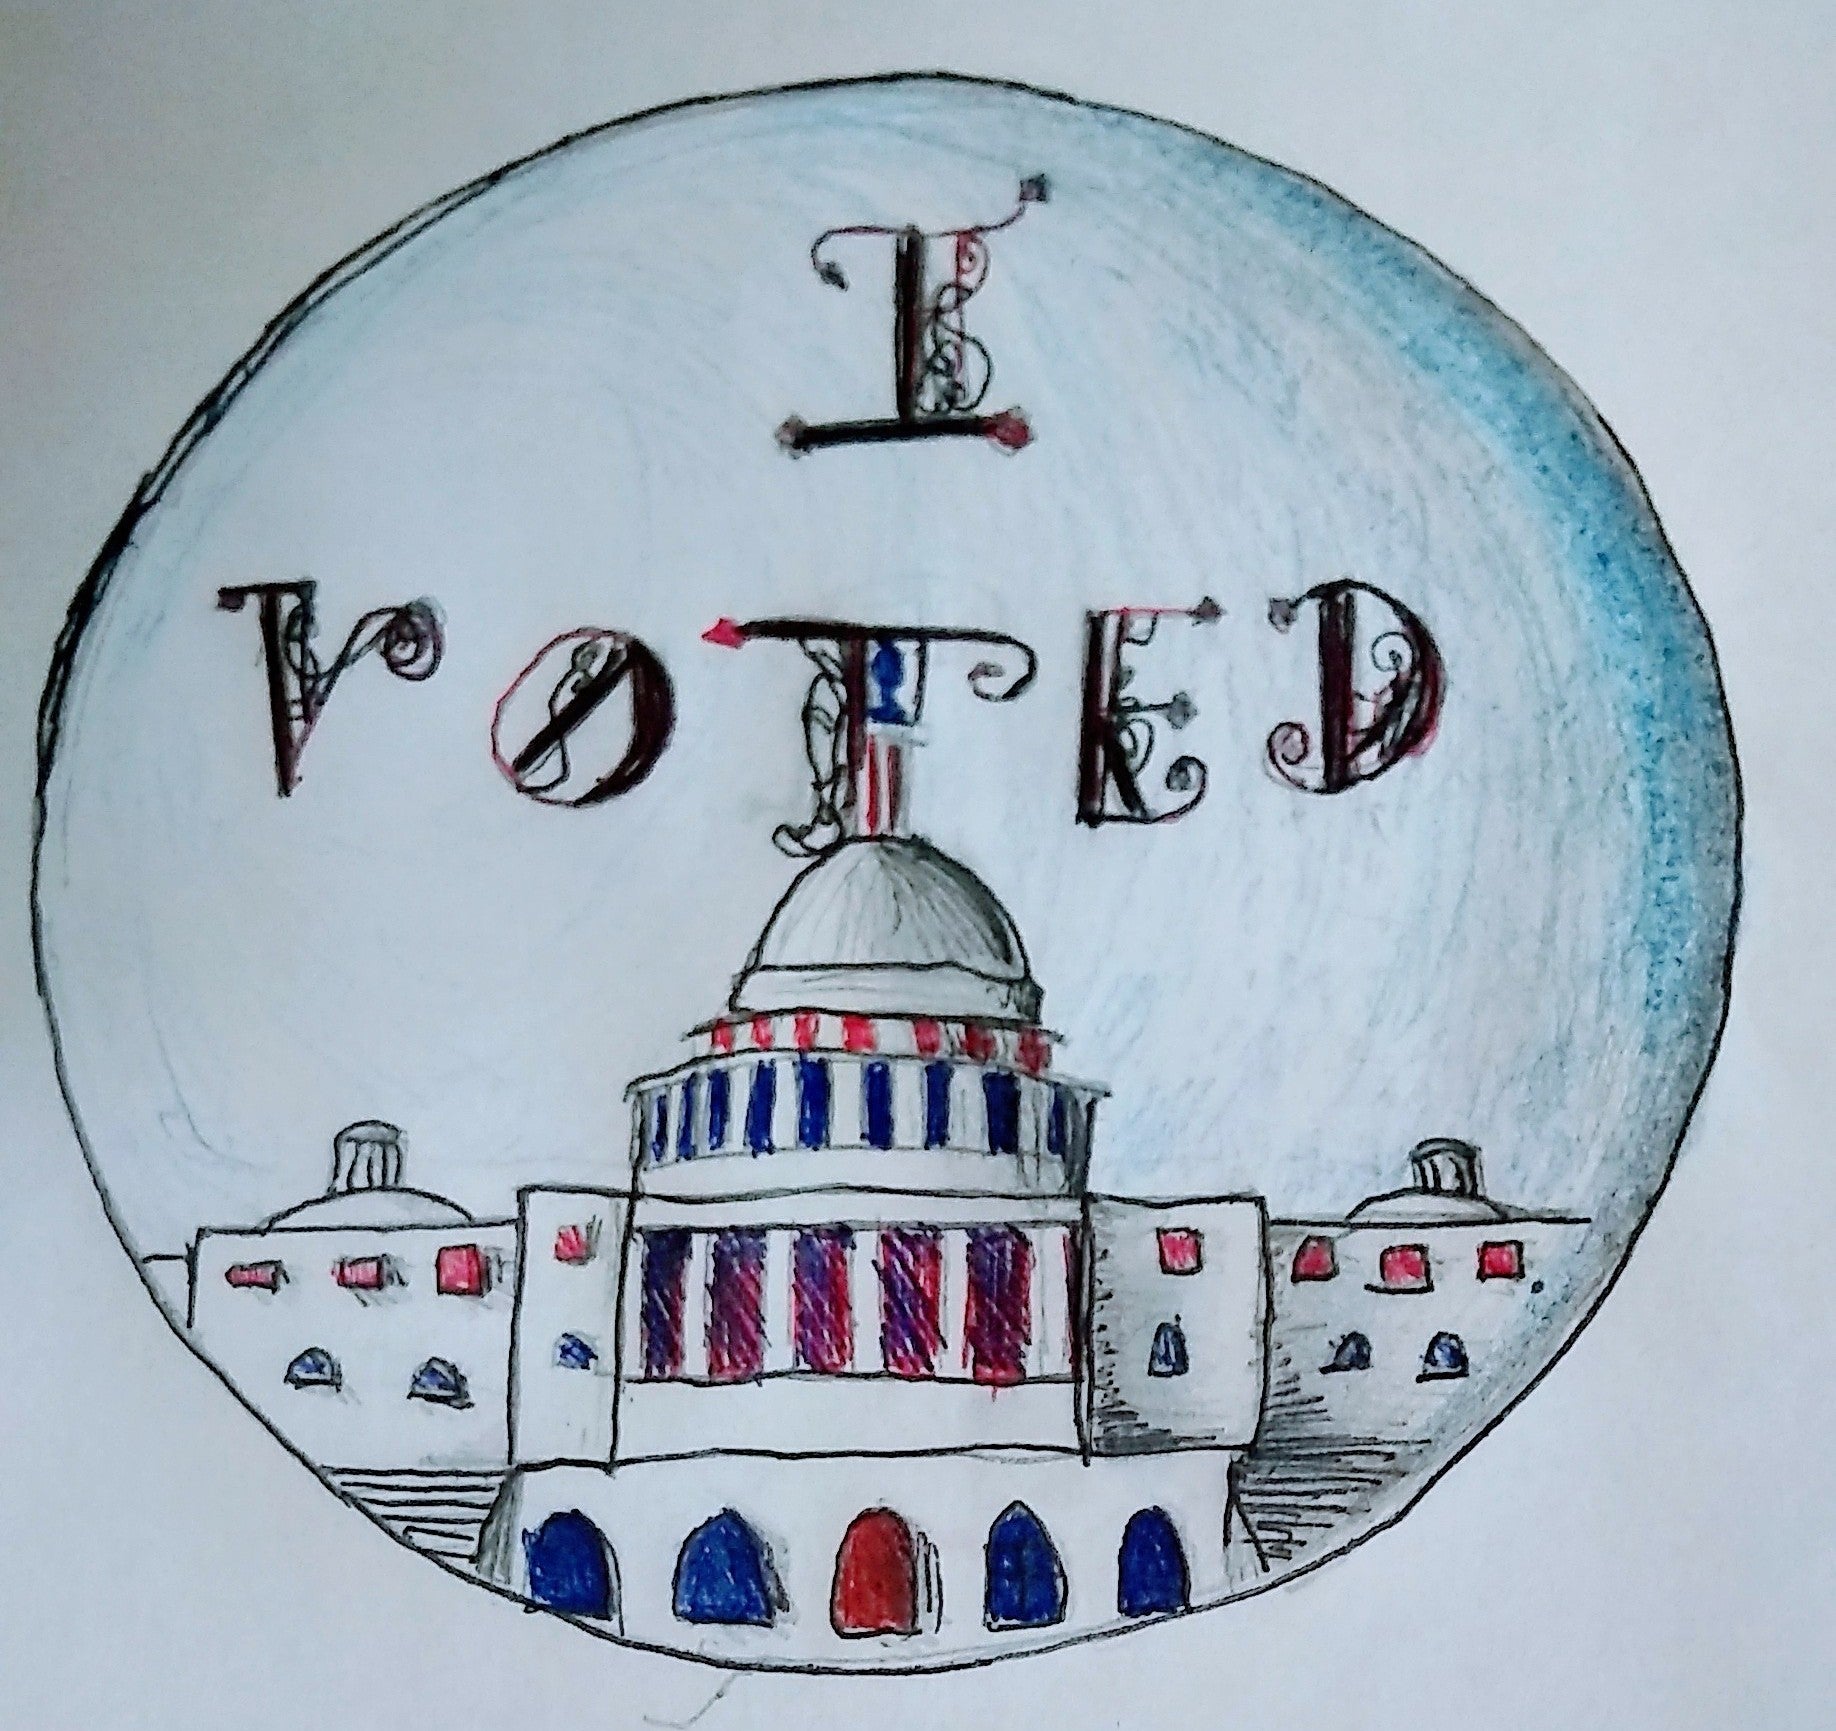 The Demon Spider of Ulster County: How Six ‘I Voted’ Stickers Won the Internet